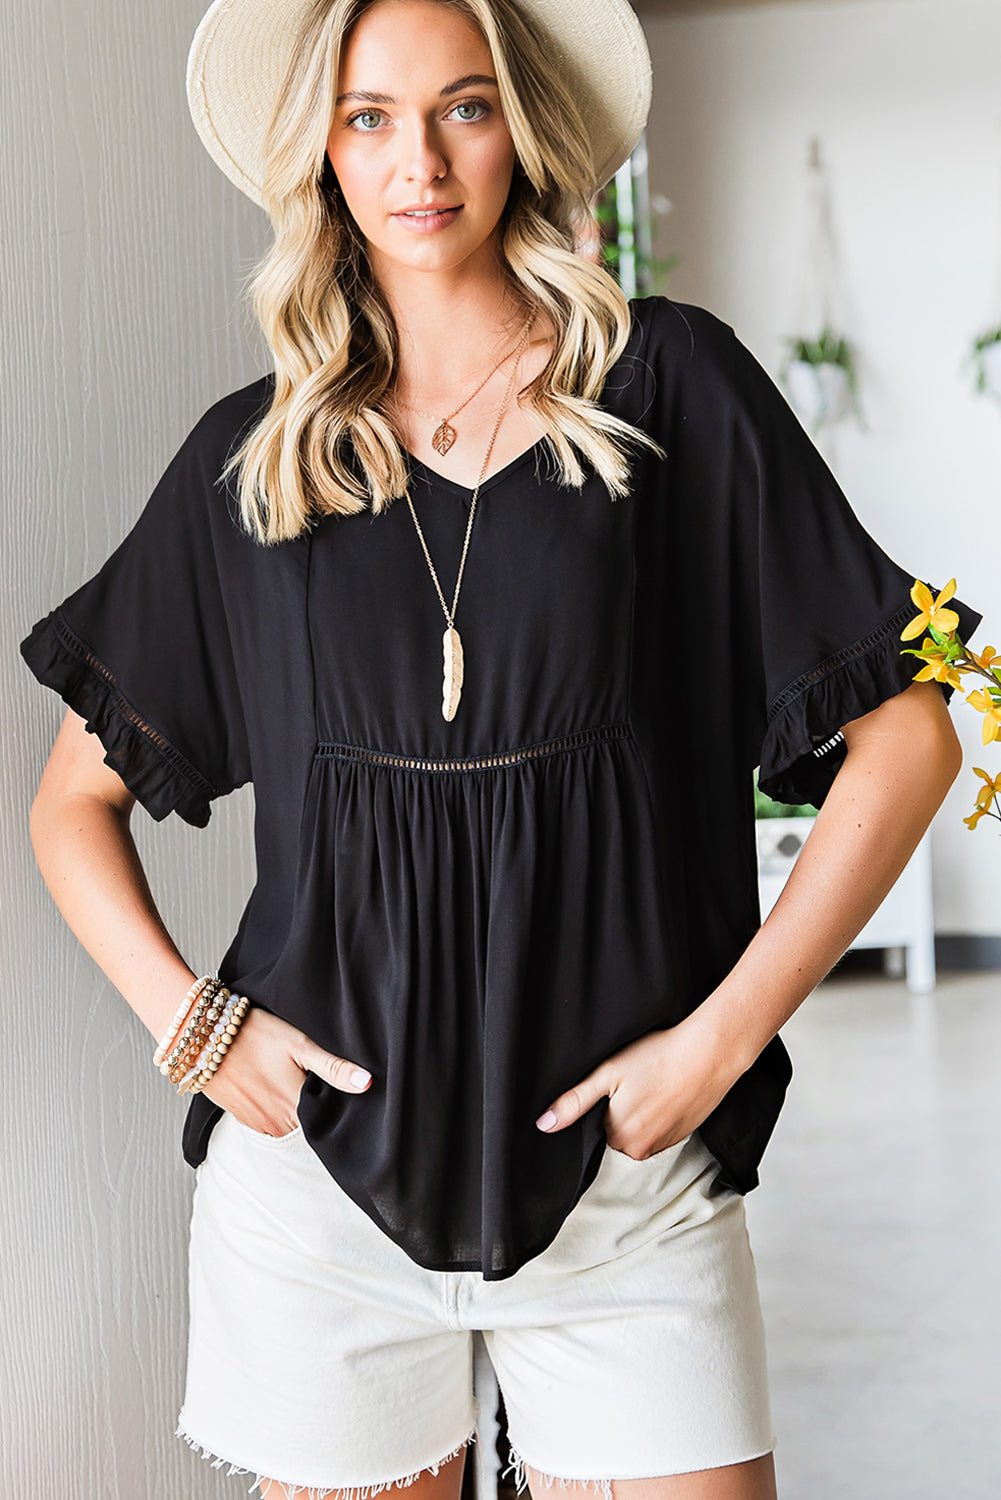 V-Neck Flounce Sleeve Babydoll Blouse - Black / S - Women’s Clothing & Accessories - Shirts & Tops - 1 - 2024